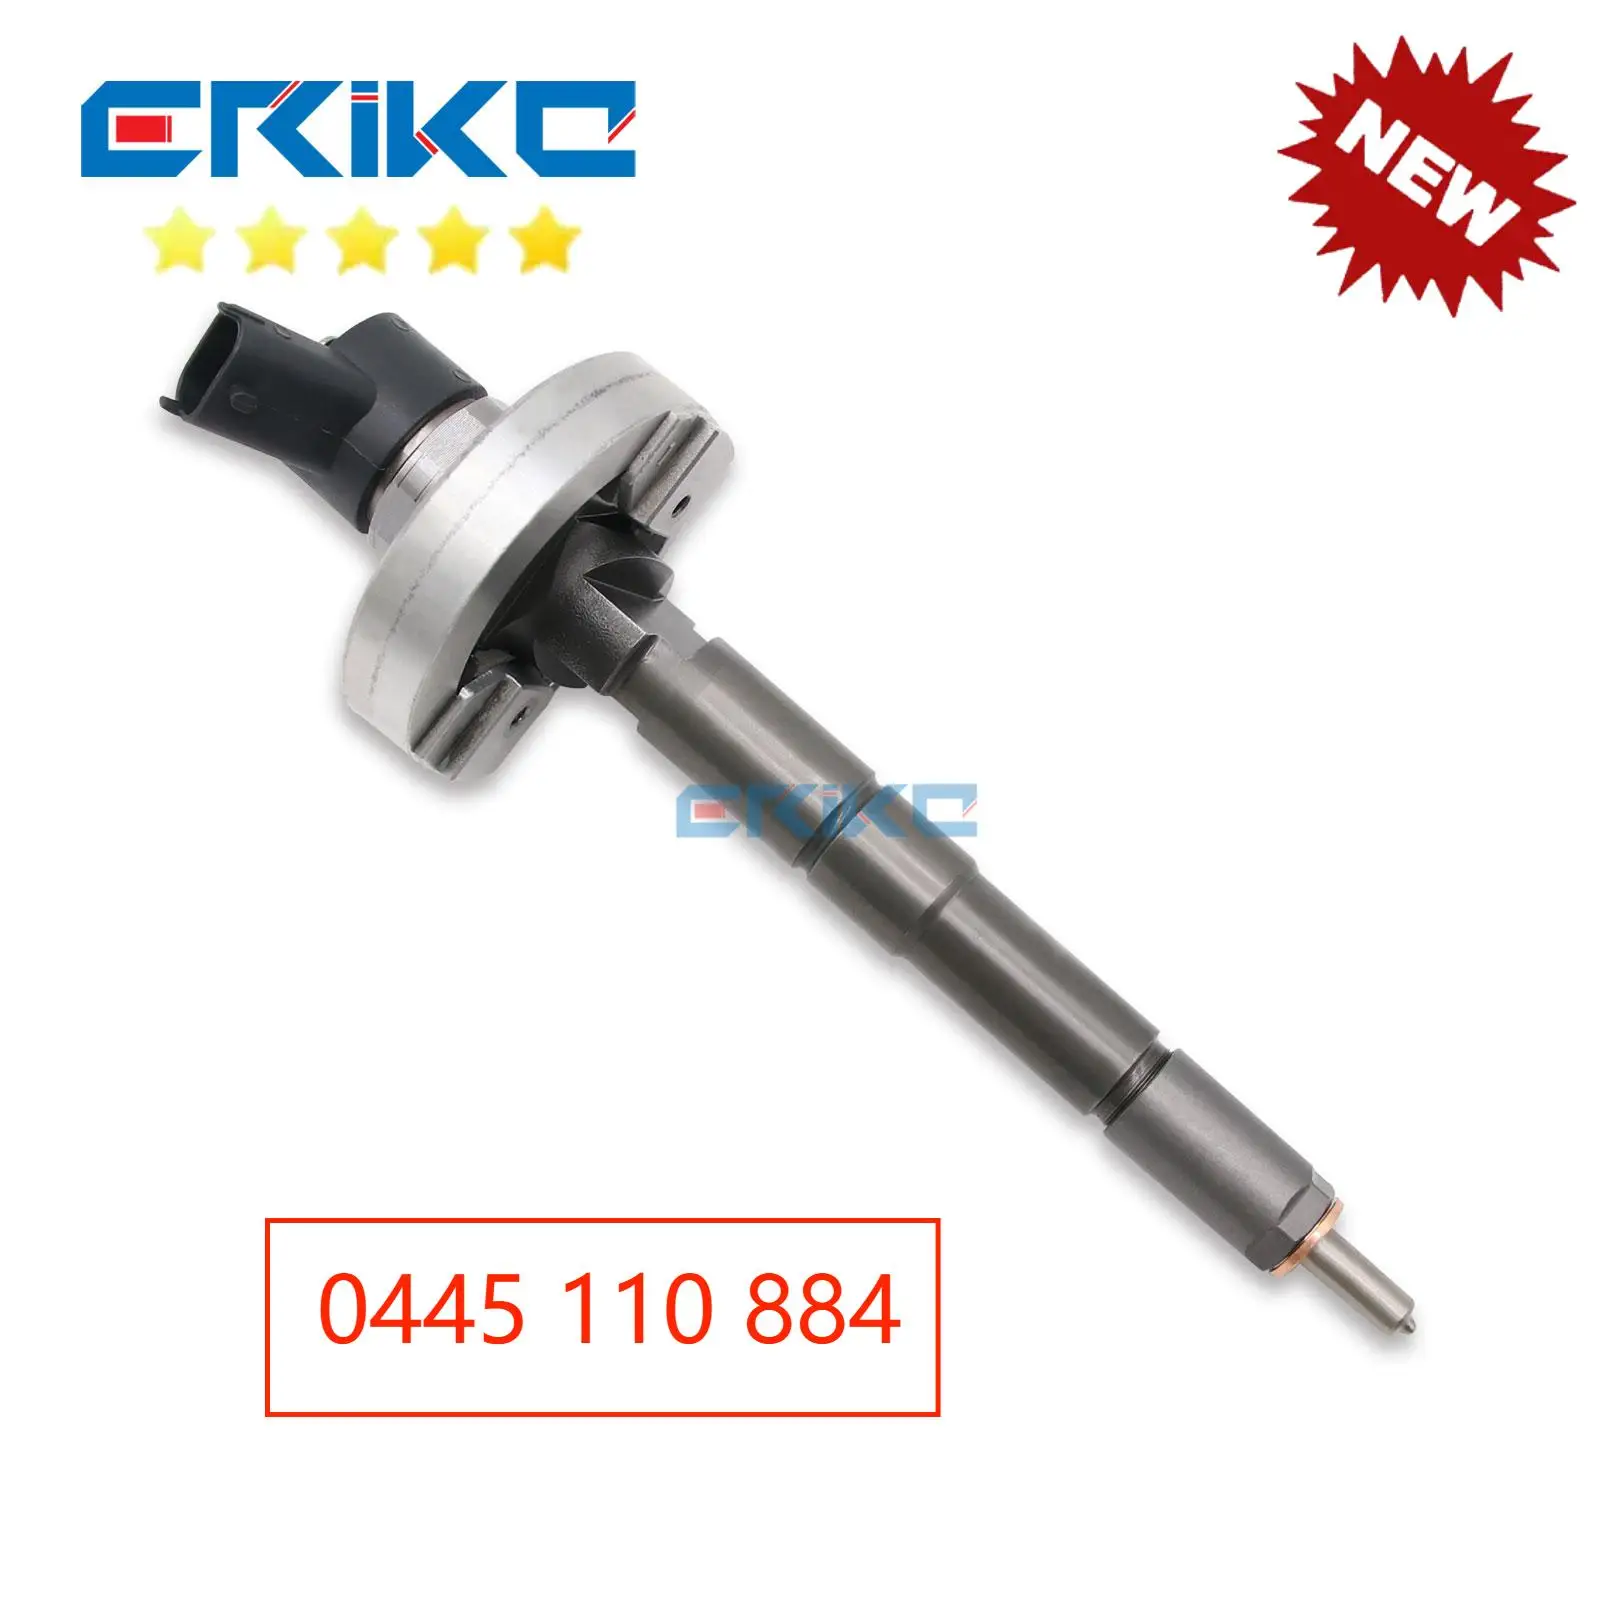 

0445110884 Diesel Fuel Injection OE 0 445 110 884 Common Rail Fuel Injector for BOSCH Auto Injection Assy 0445 110 884